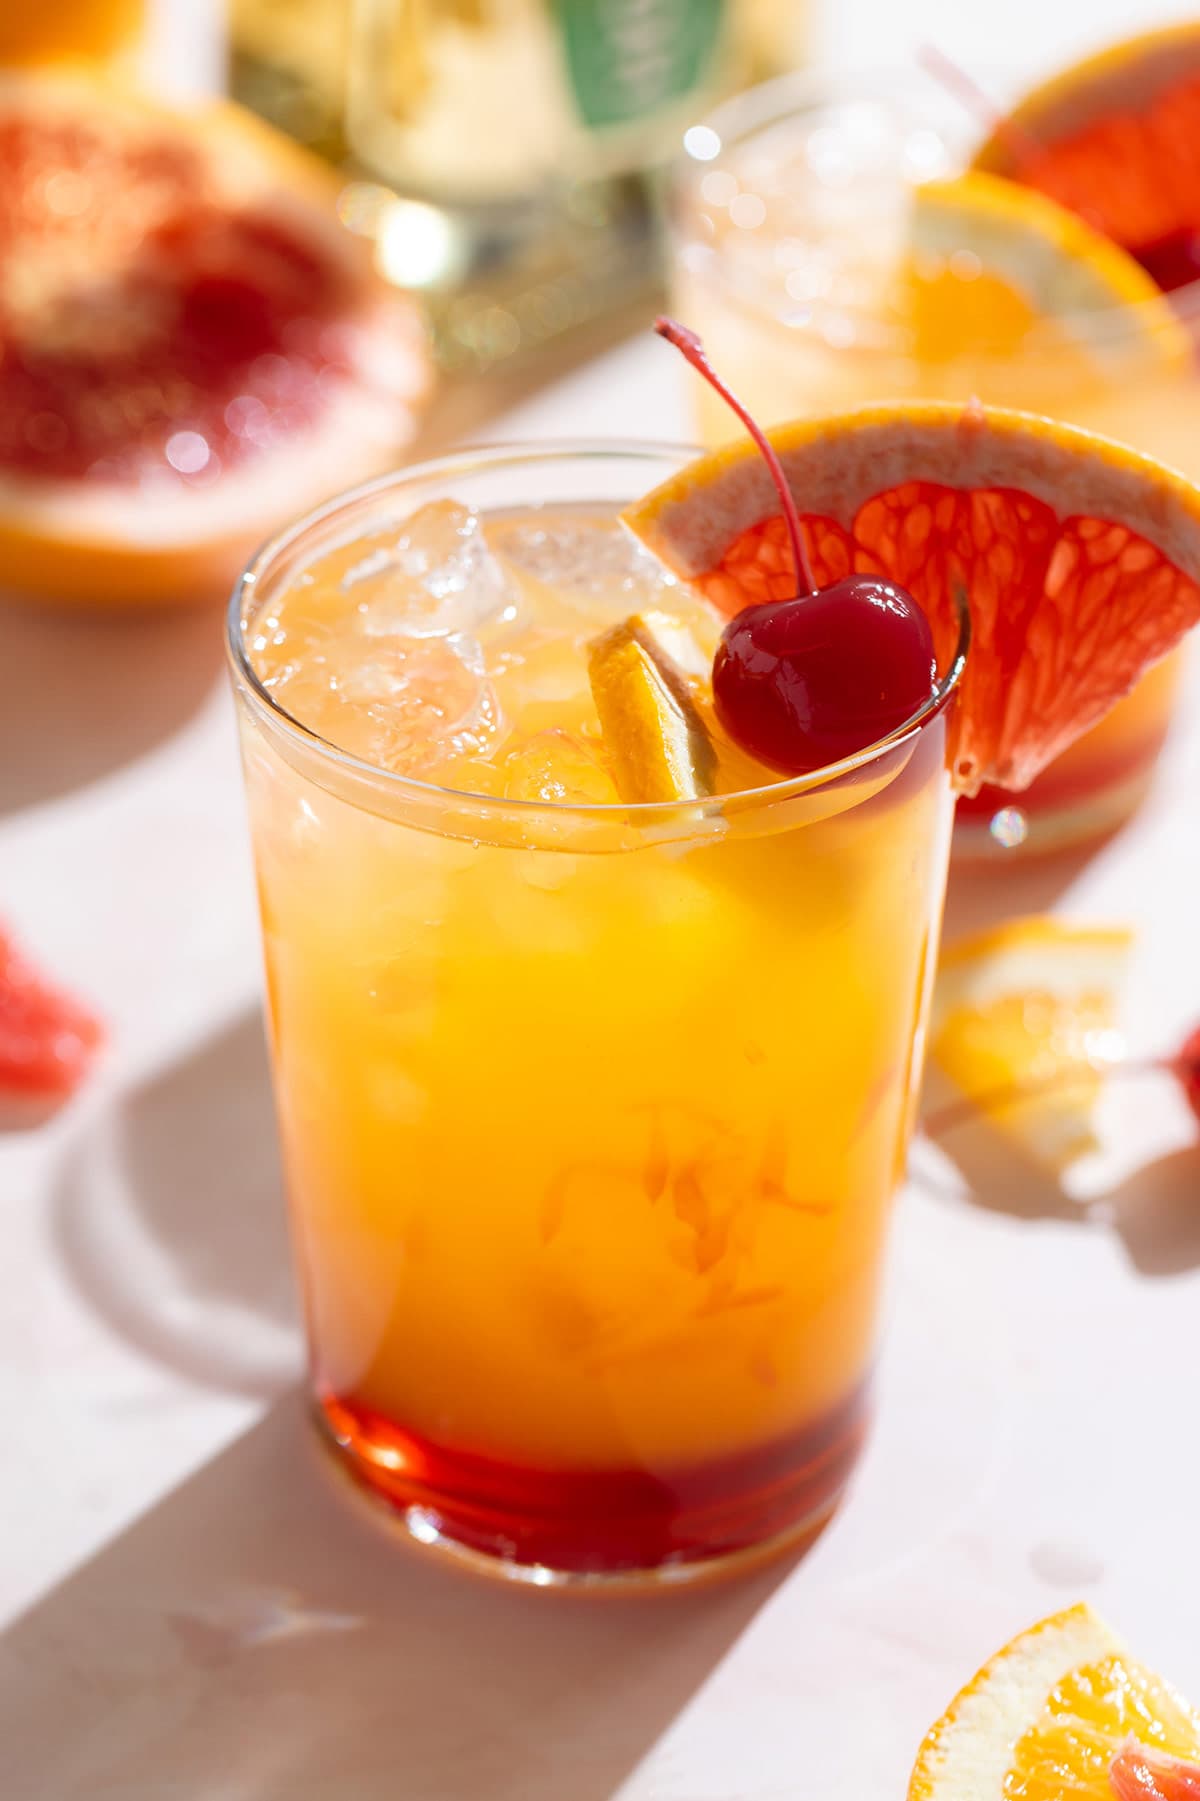 A tequila sunset cocktail in a tall glass with orange juice and red grenadine on the bottom of the glass for an ombre effect garnished with a cocktail cherry and a slice of grapefruit.